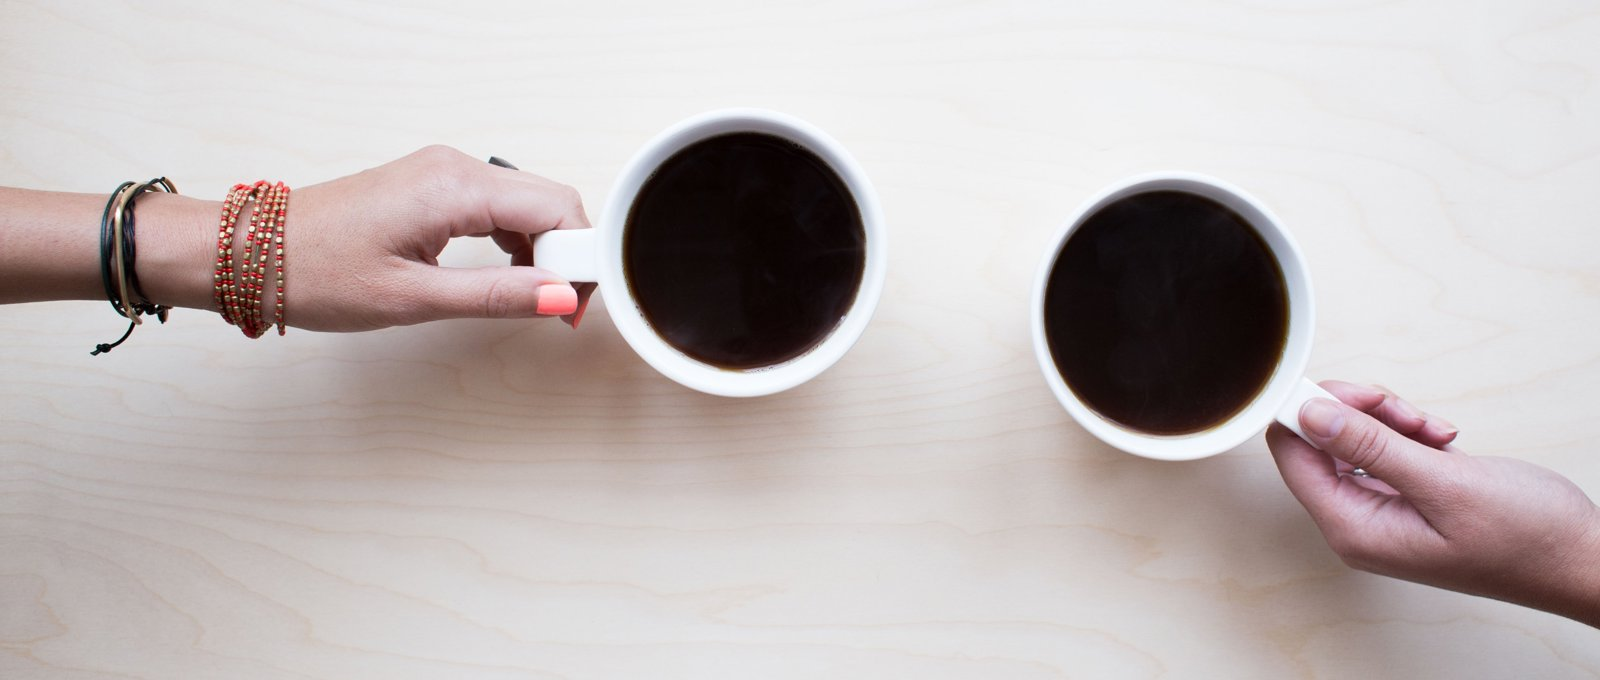 A shot from above of two mugs of black coffee, with a hand resting on each mug